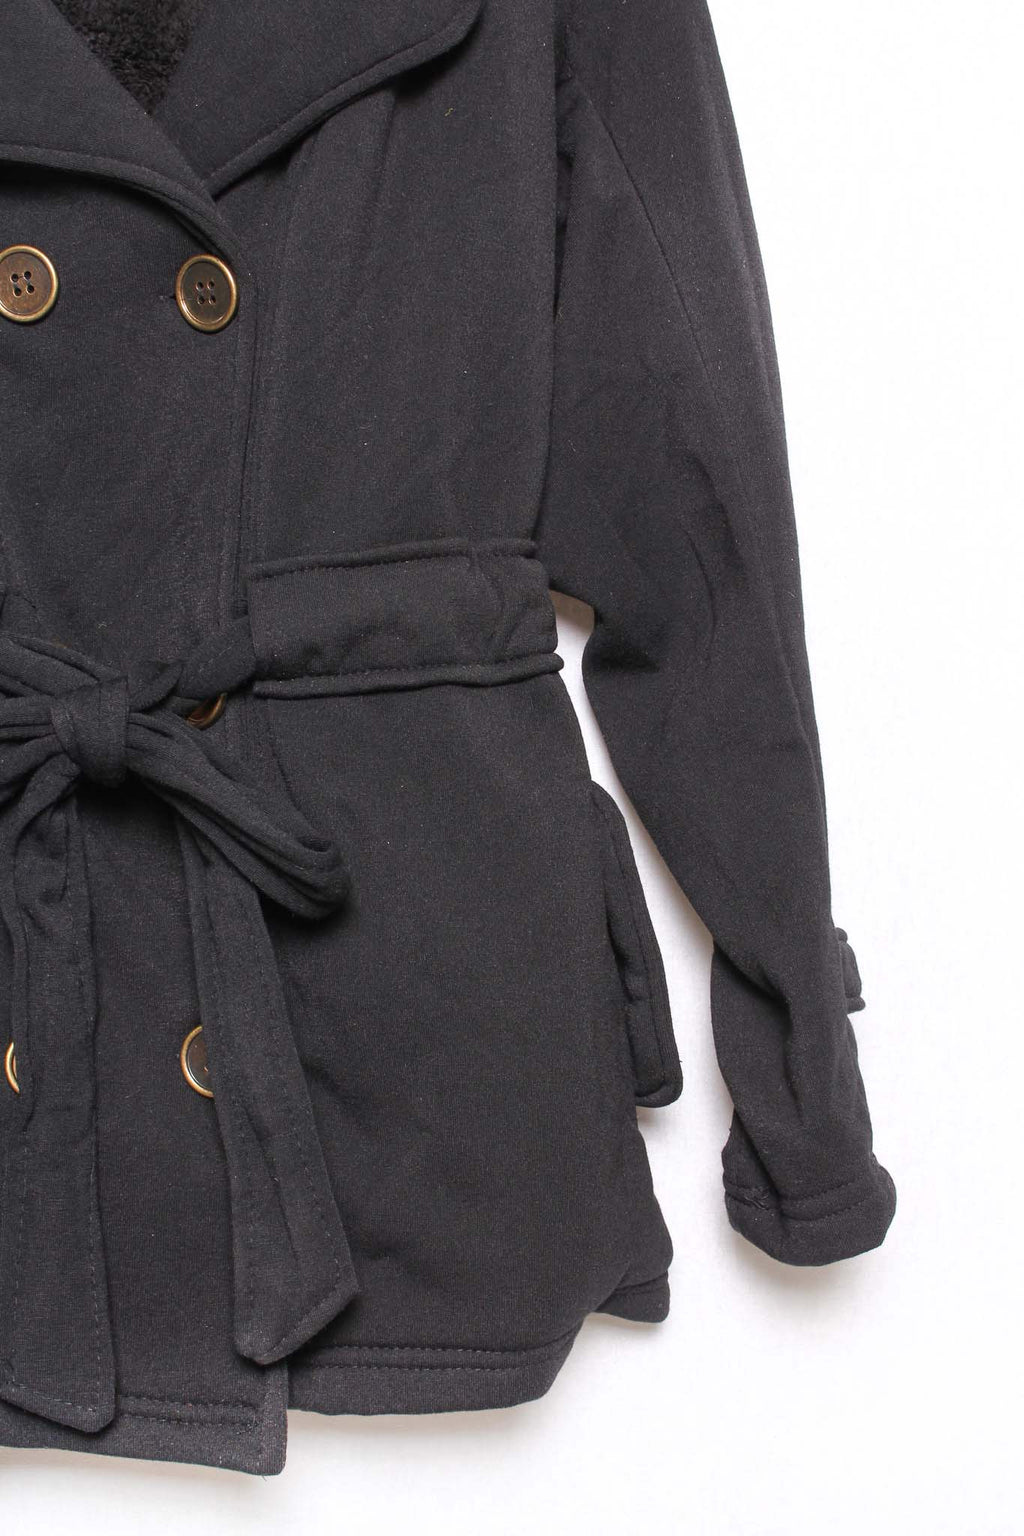 Women's Long Sleeve Button Down Belted Hooded Jacket